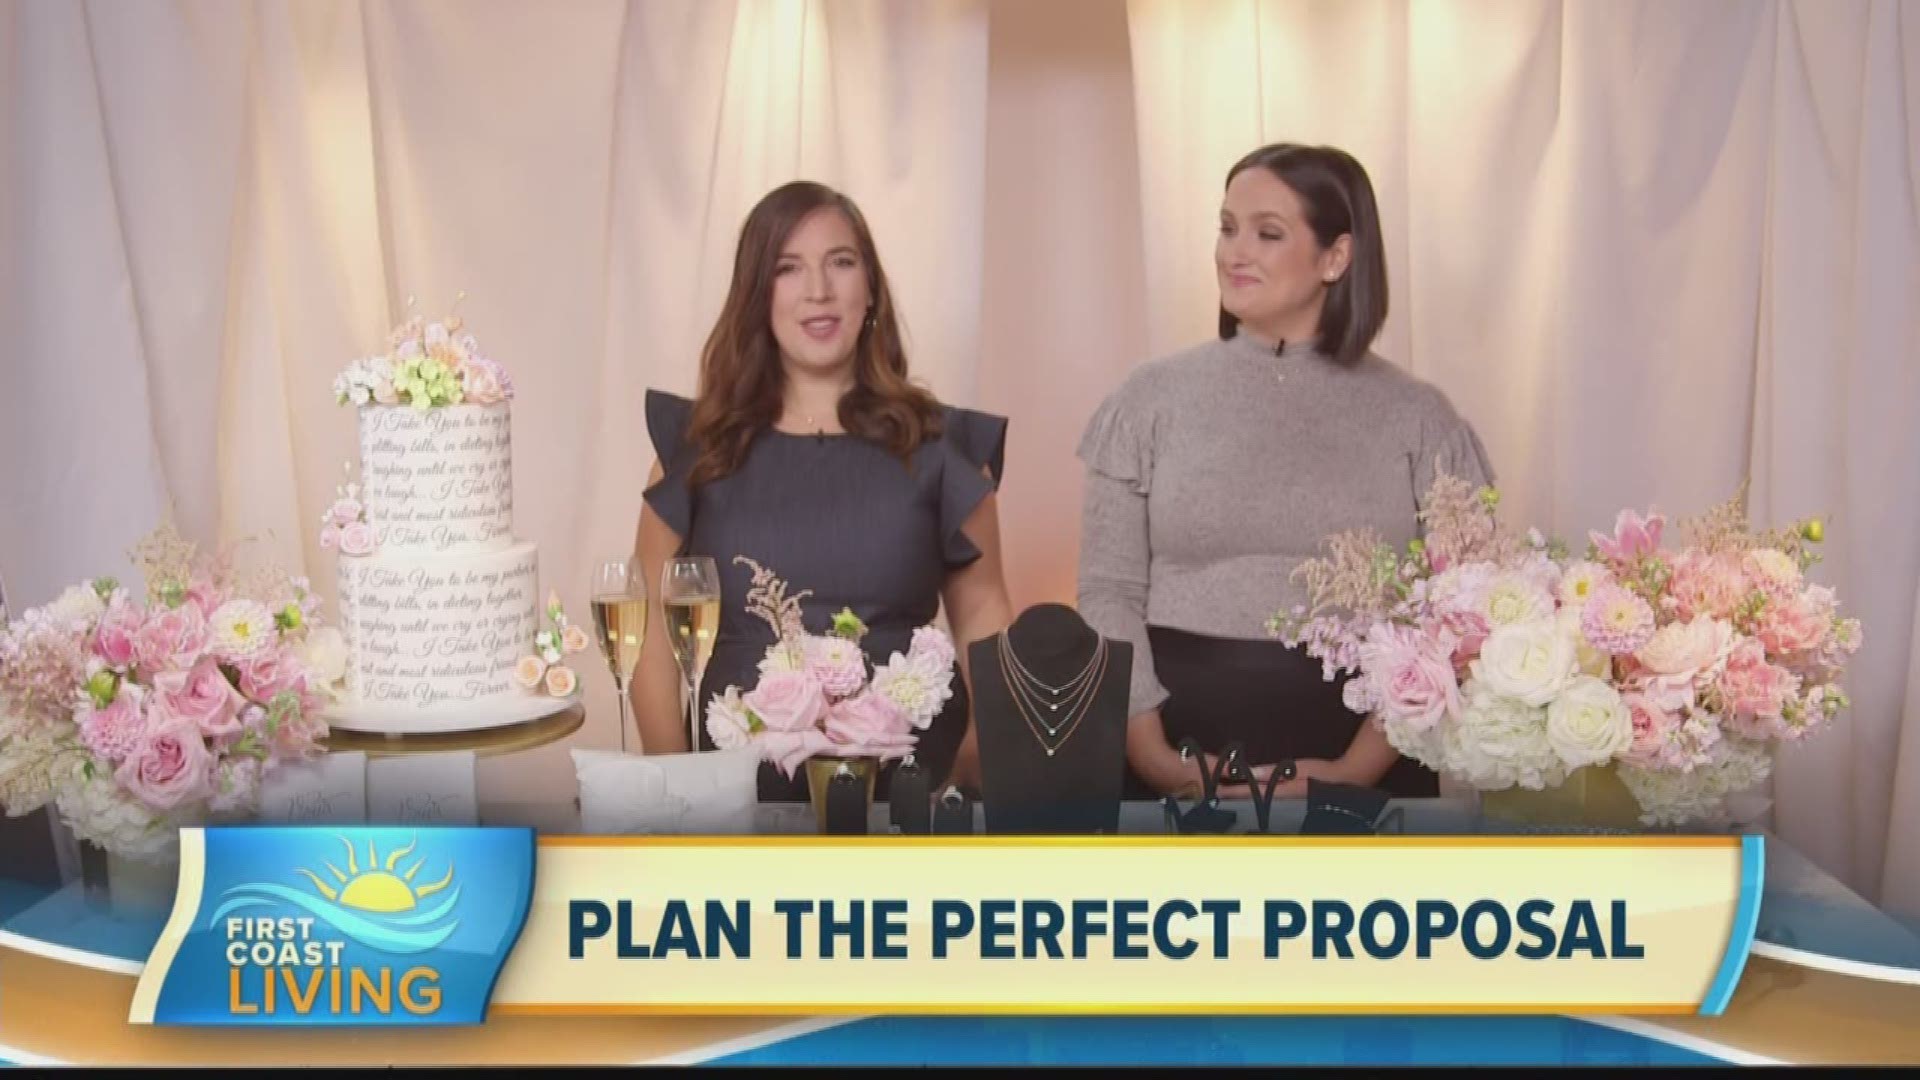 Top bridal trends and tips to help you prepare  ahead of the holiday proposal season!